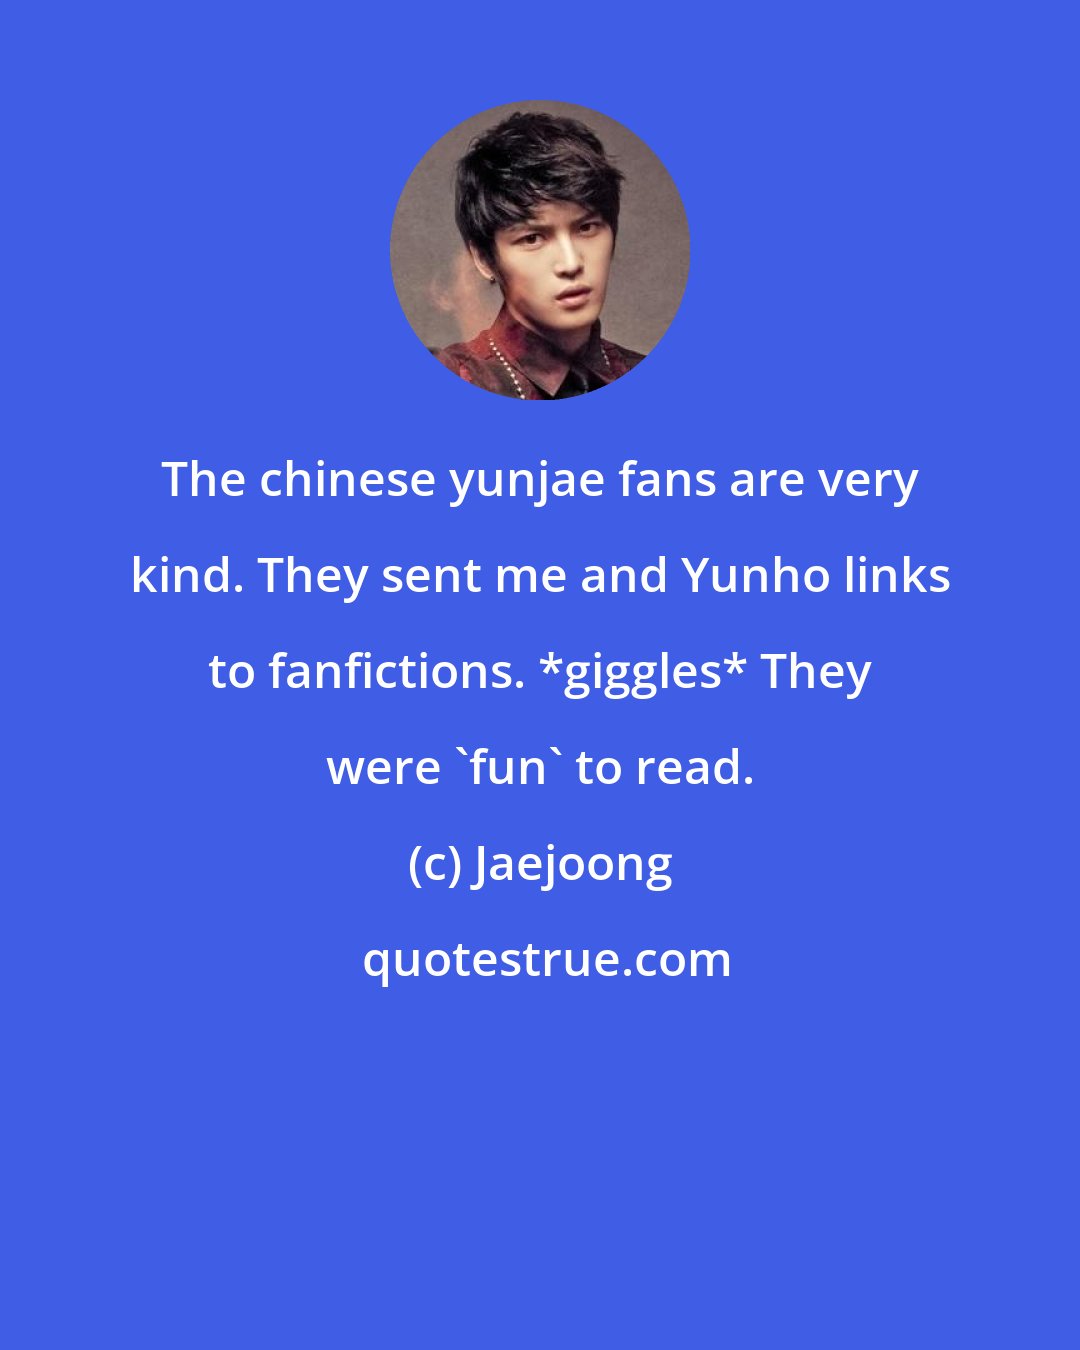 Jaejoong: The chinese yunjae fans are very kind. They sent me and Yunho links to fanfictions. *giggles* They were 'fun' to read.